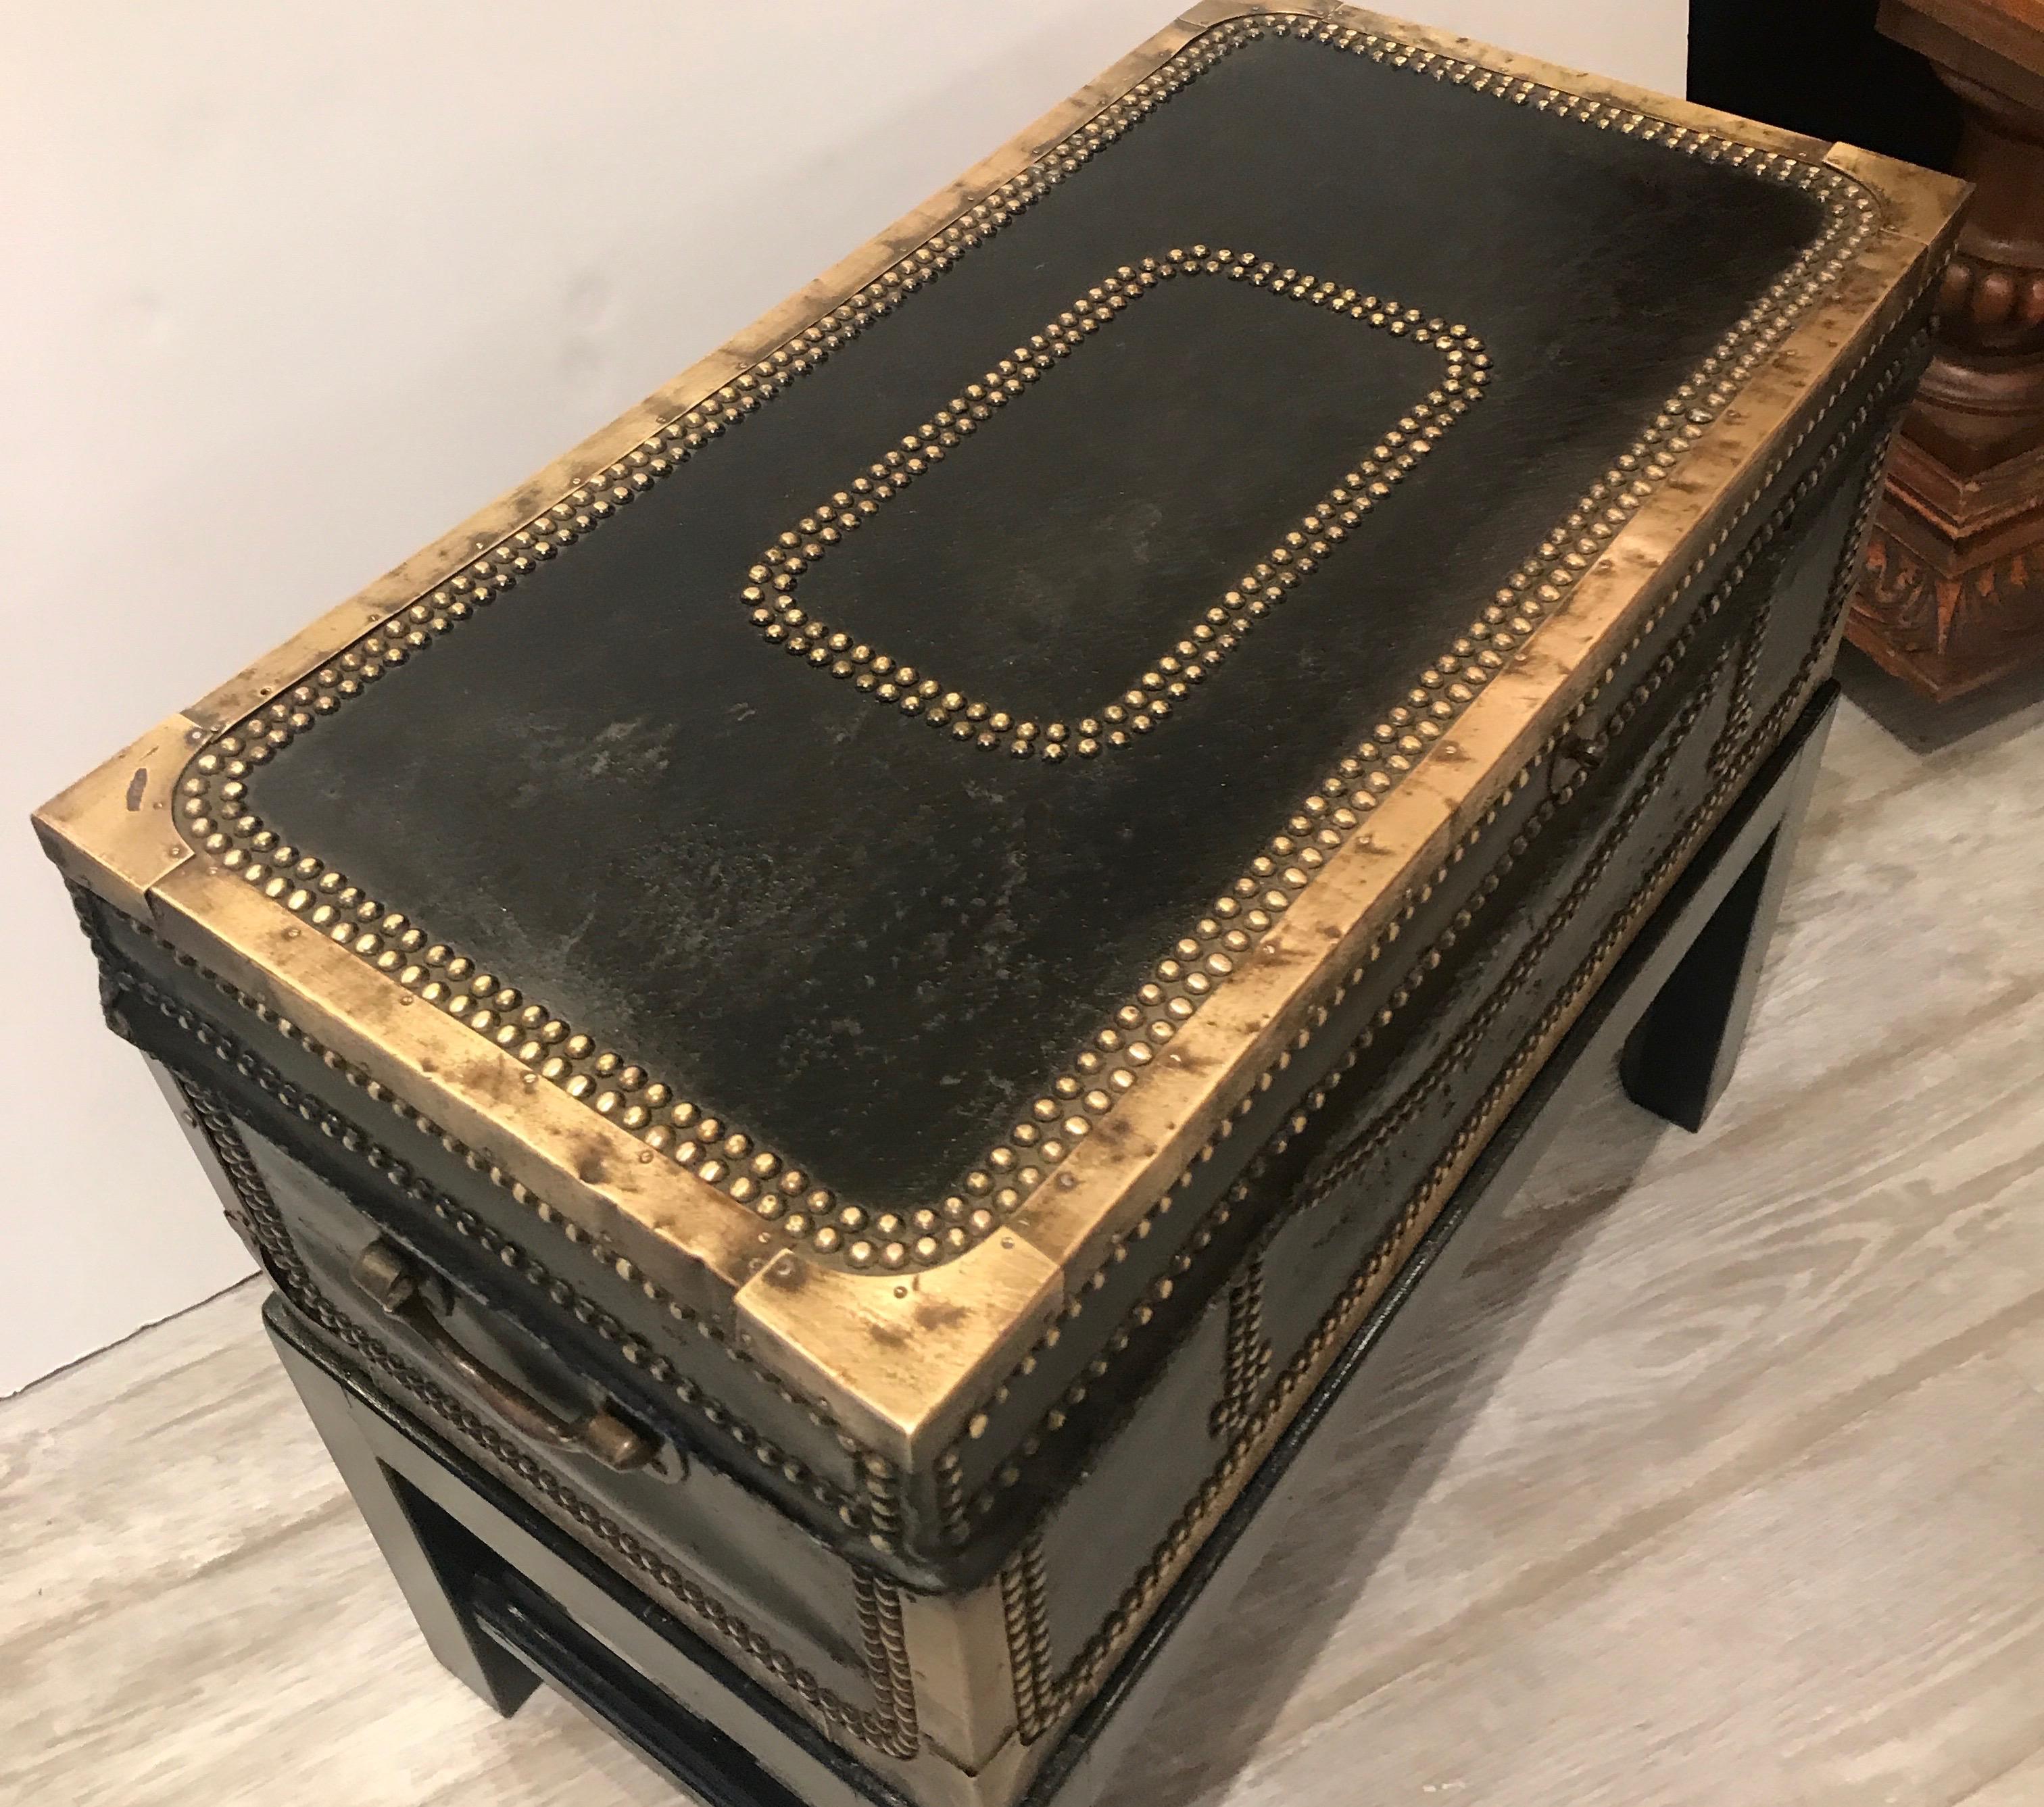 Handsome antique leather cased trunk on stand. An English leather covered trunk with brass nail head trim and corners. The original leather with age appropriate wear but has been cleaned and conditioned. The trunk is 19th century with a later custom